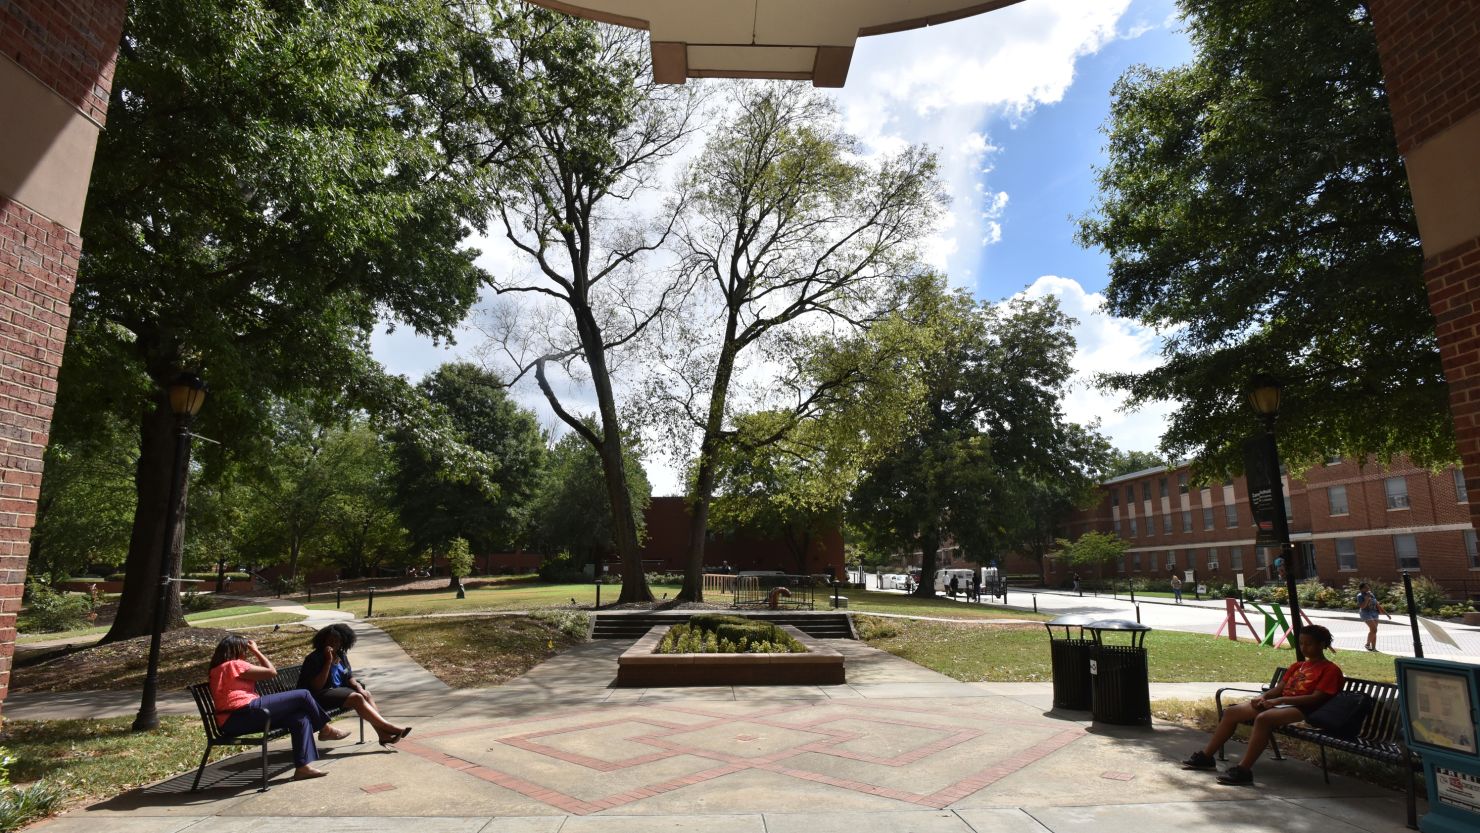 Students sit on the campus of Spelman College, a historically black liberal arts college for women located in Atlanta.